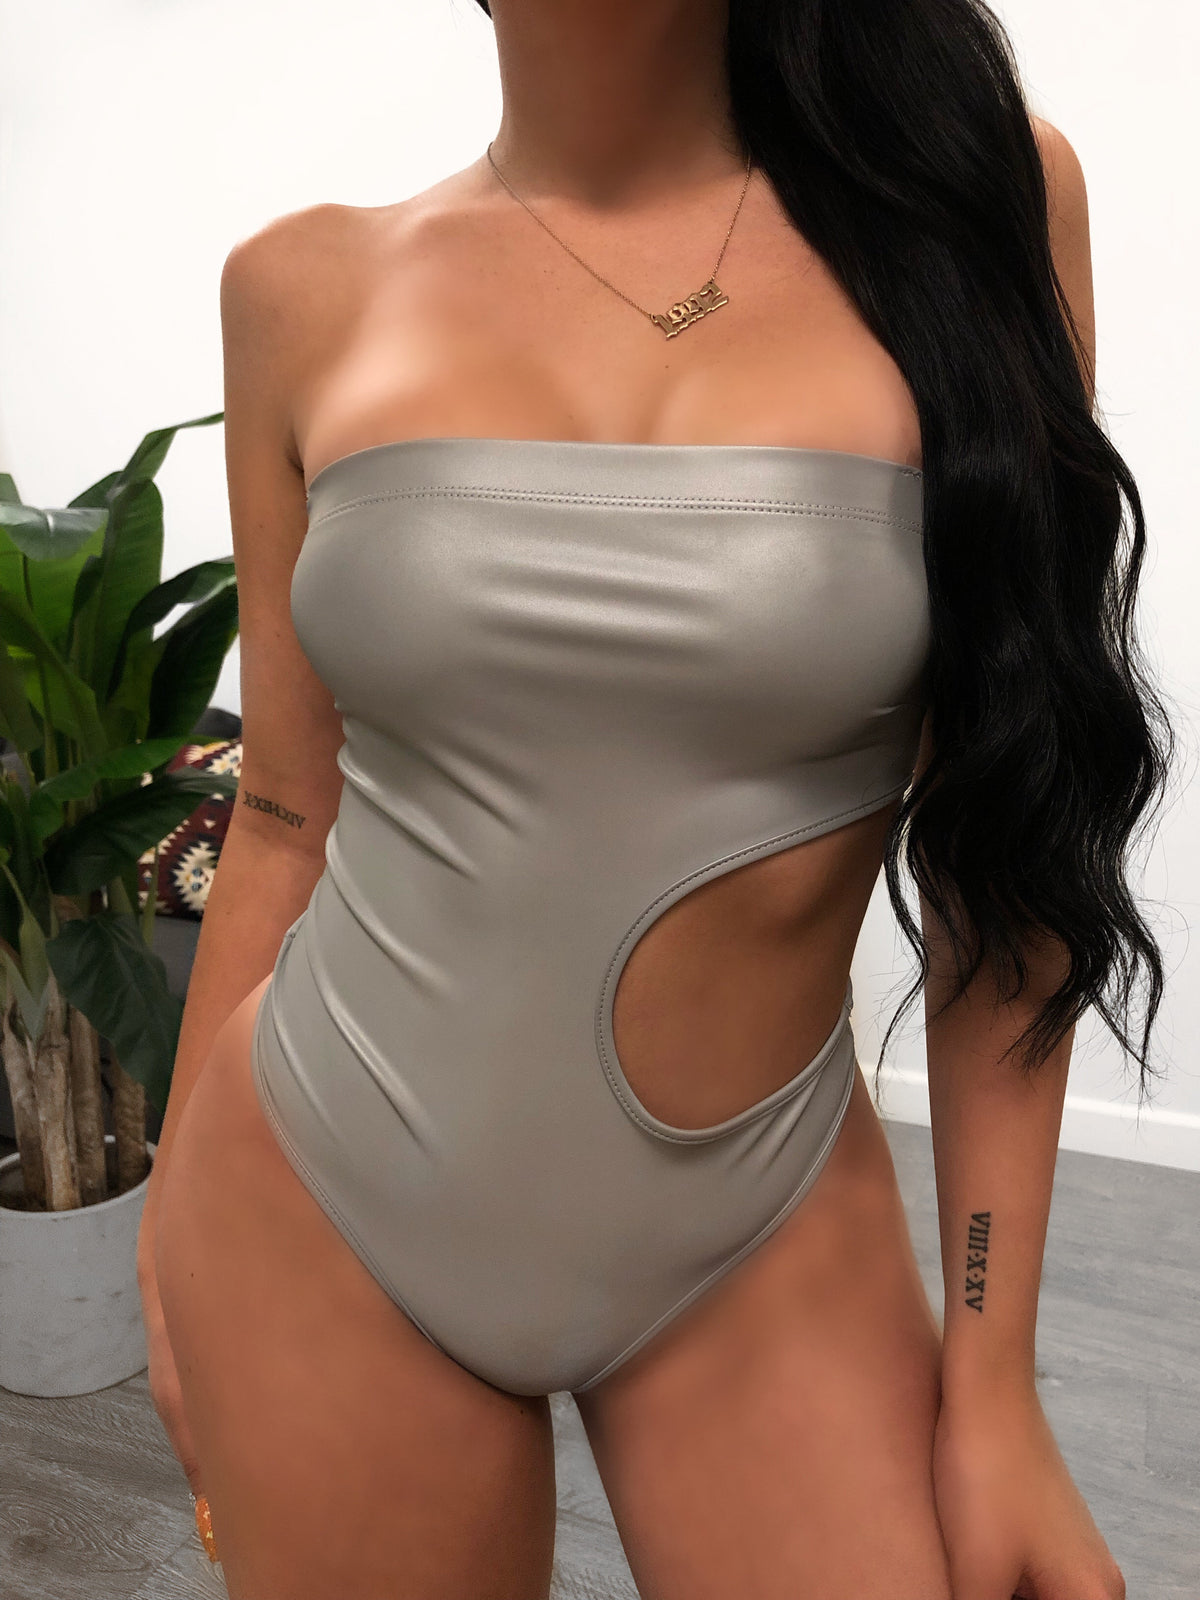 grey reflective strapless and sleeveless bodysuit, has oval shape opening on left ribs